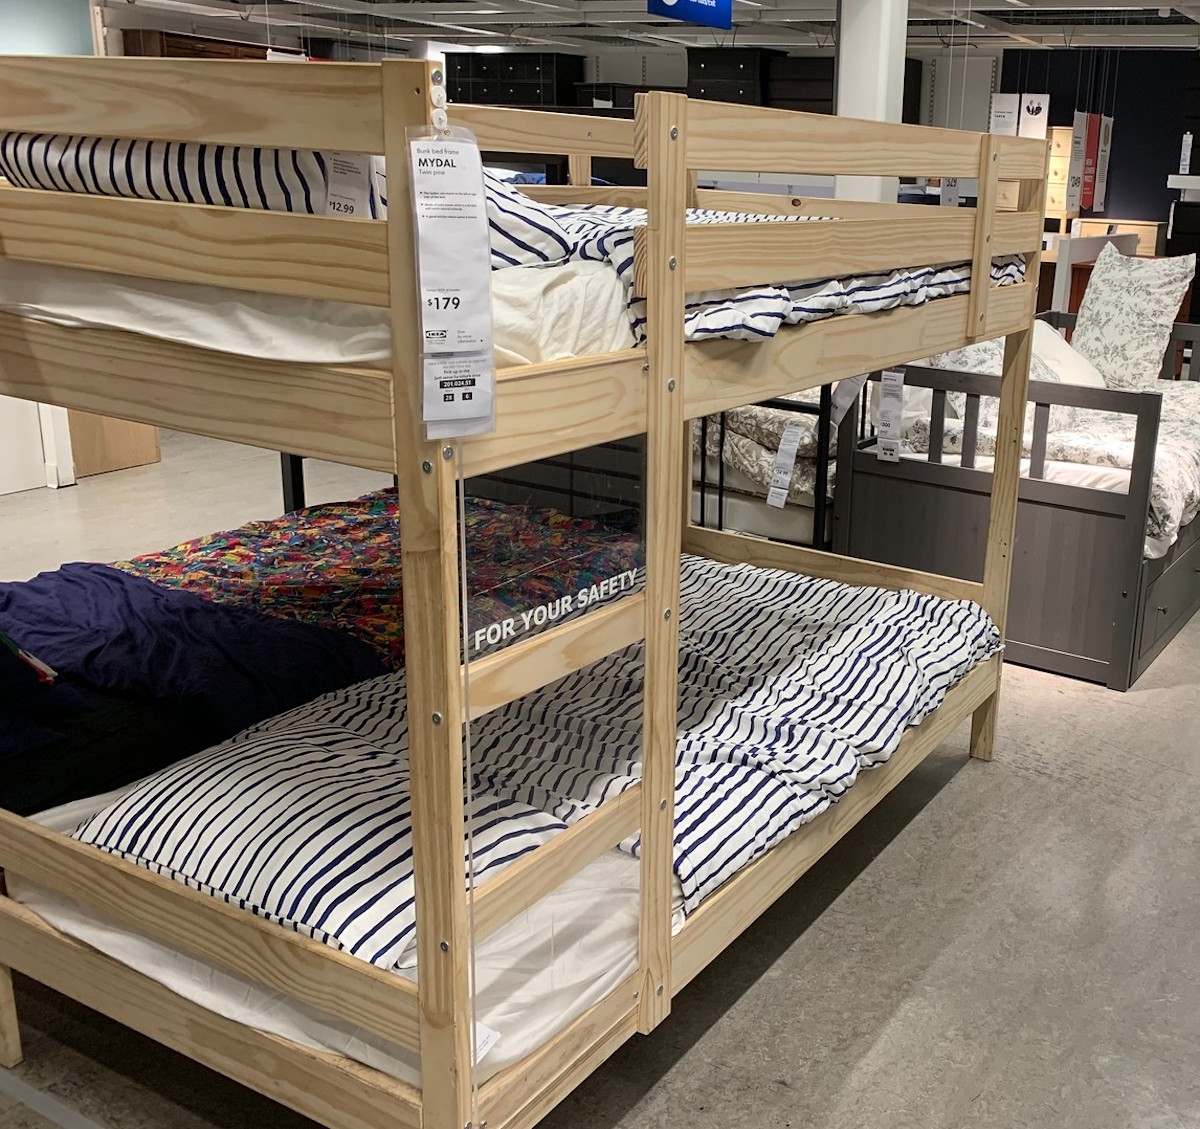 Double Bed Bunk Beds Ikea, Double Bed Bunk Beds Ikea